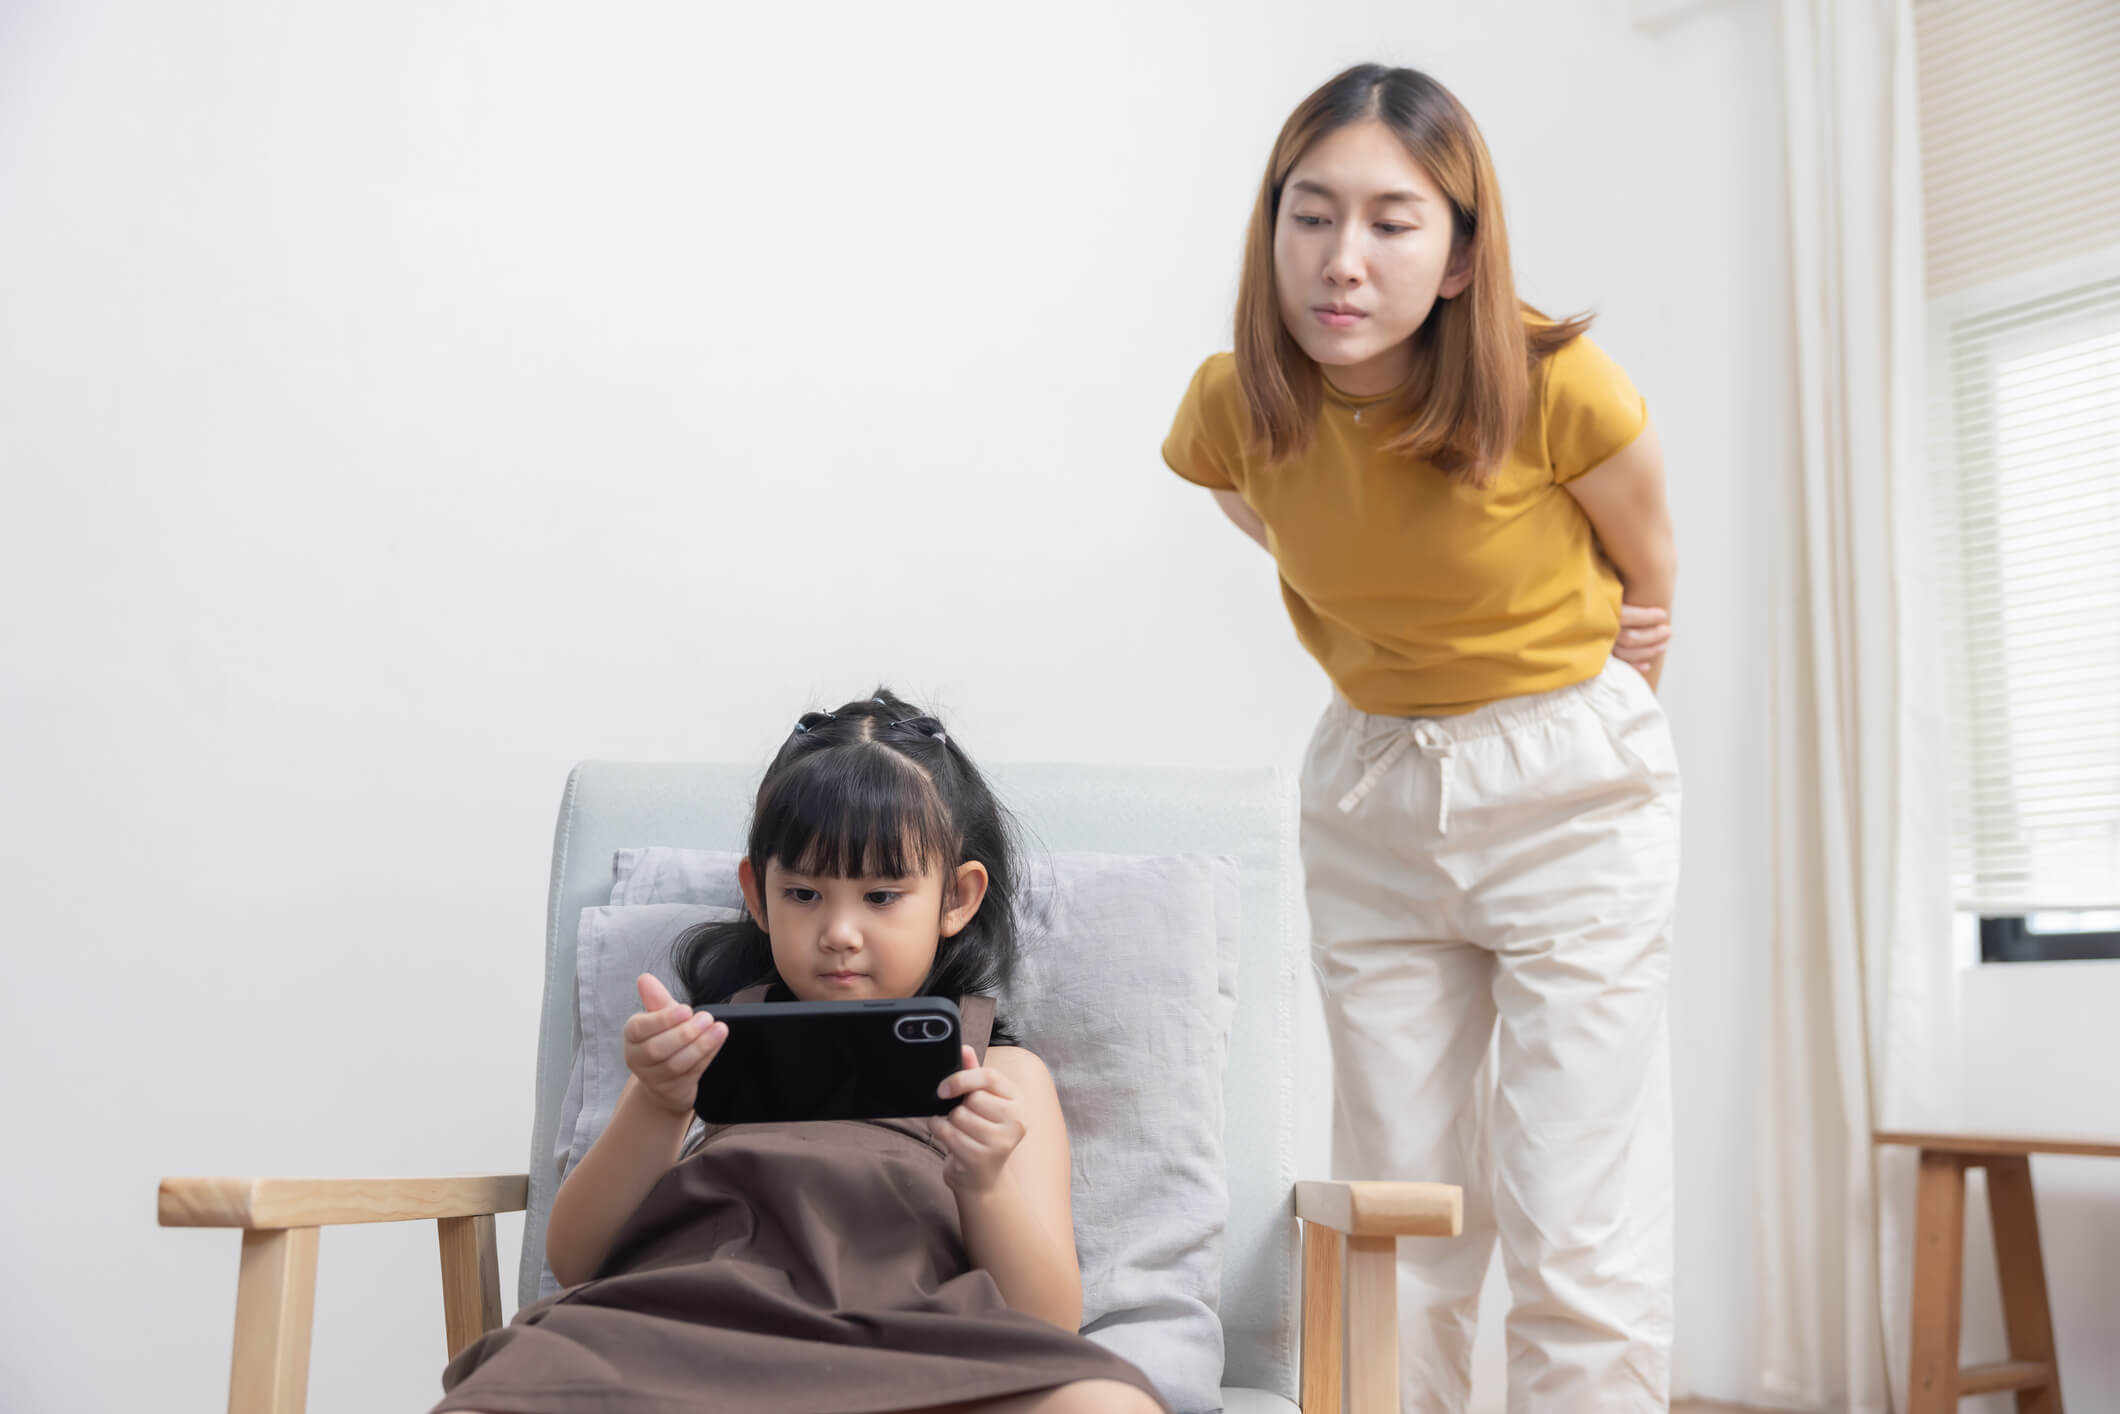 Worried Mother Looking at Her Kid Playing Game on the Smartphone